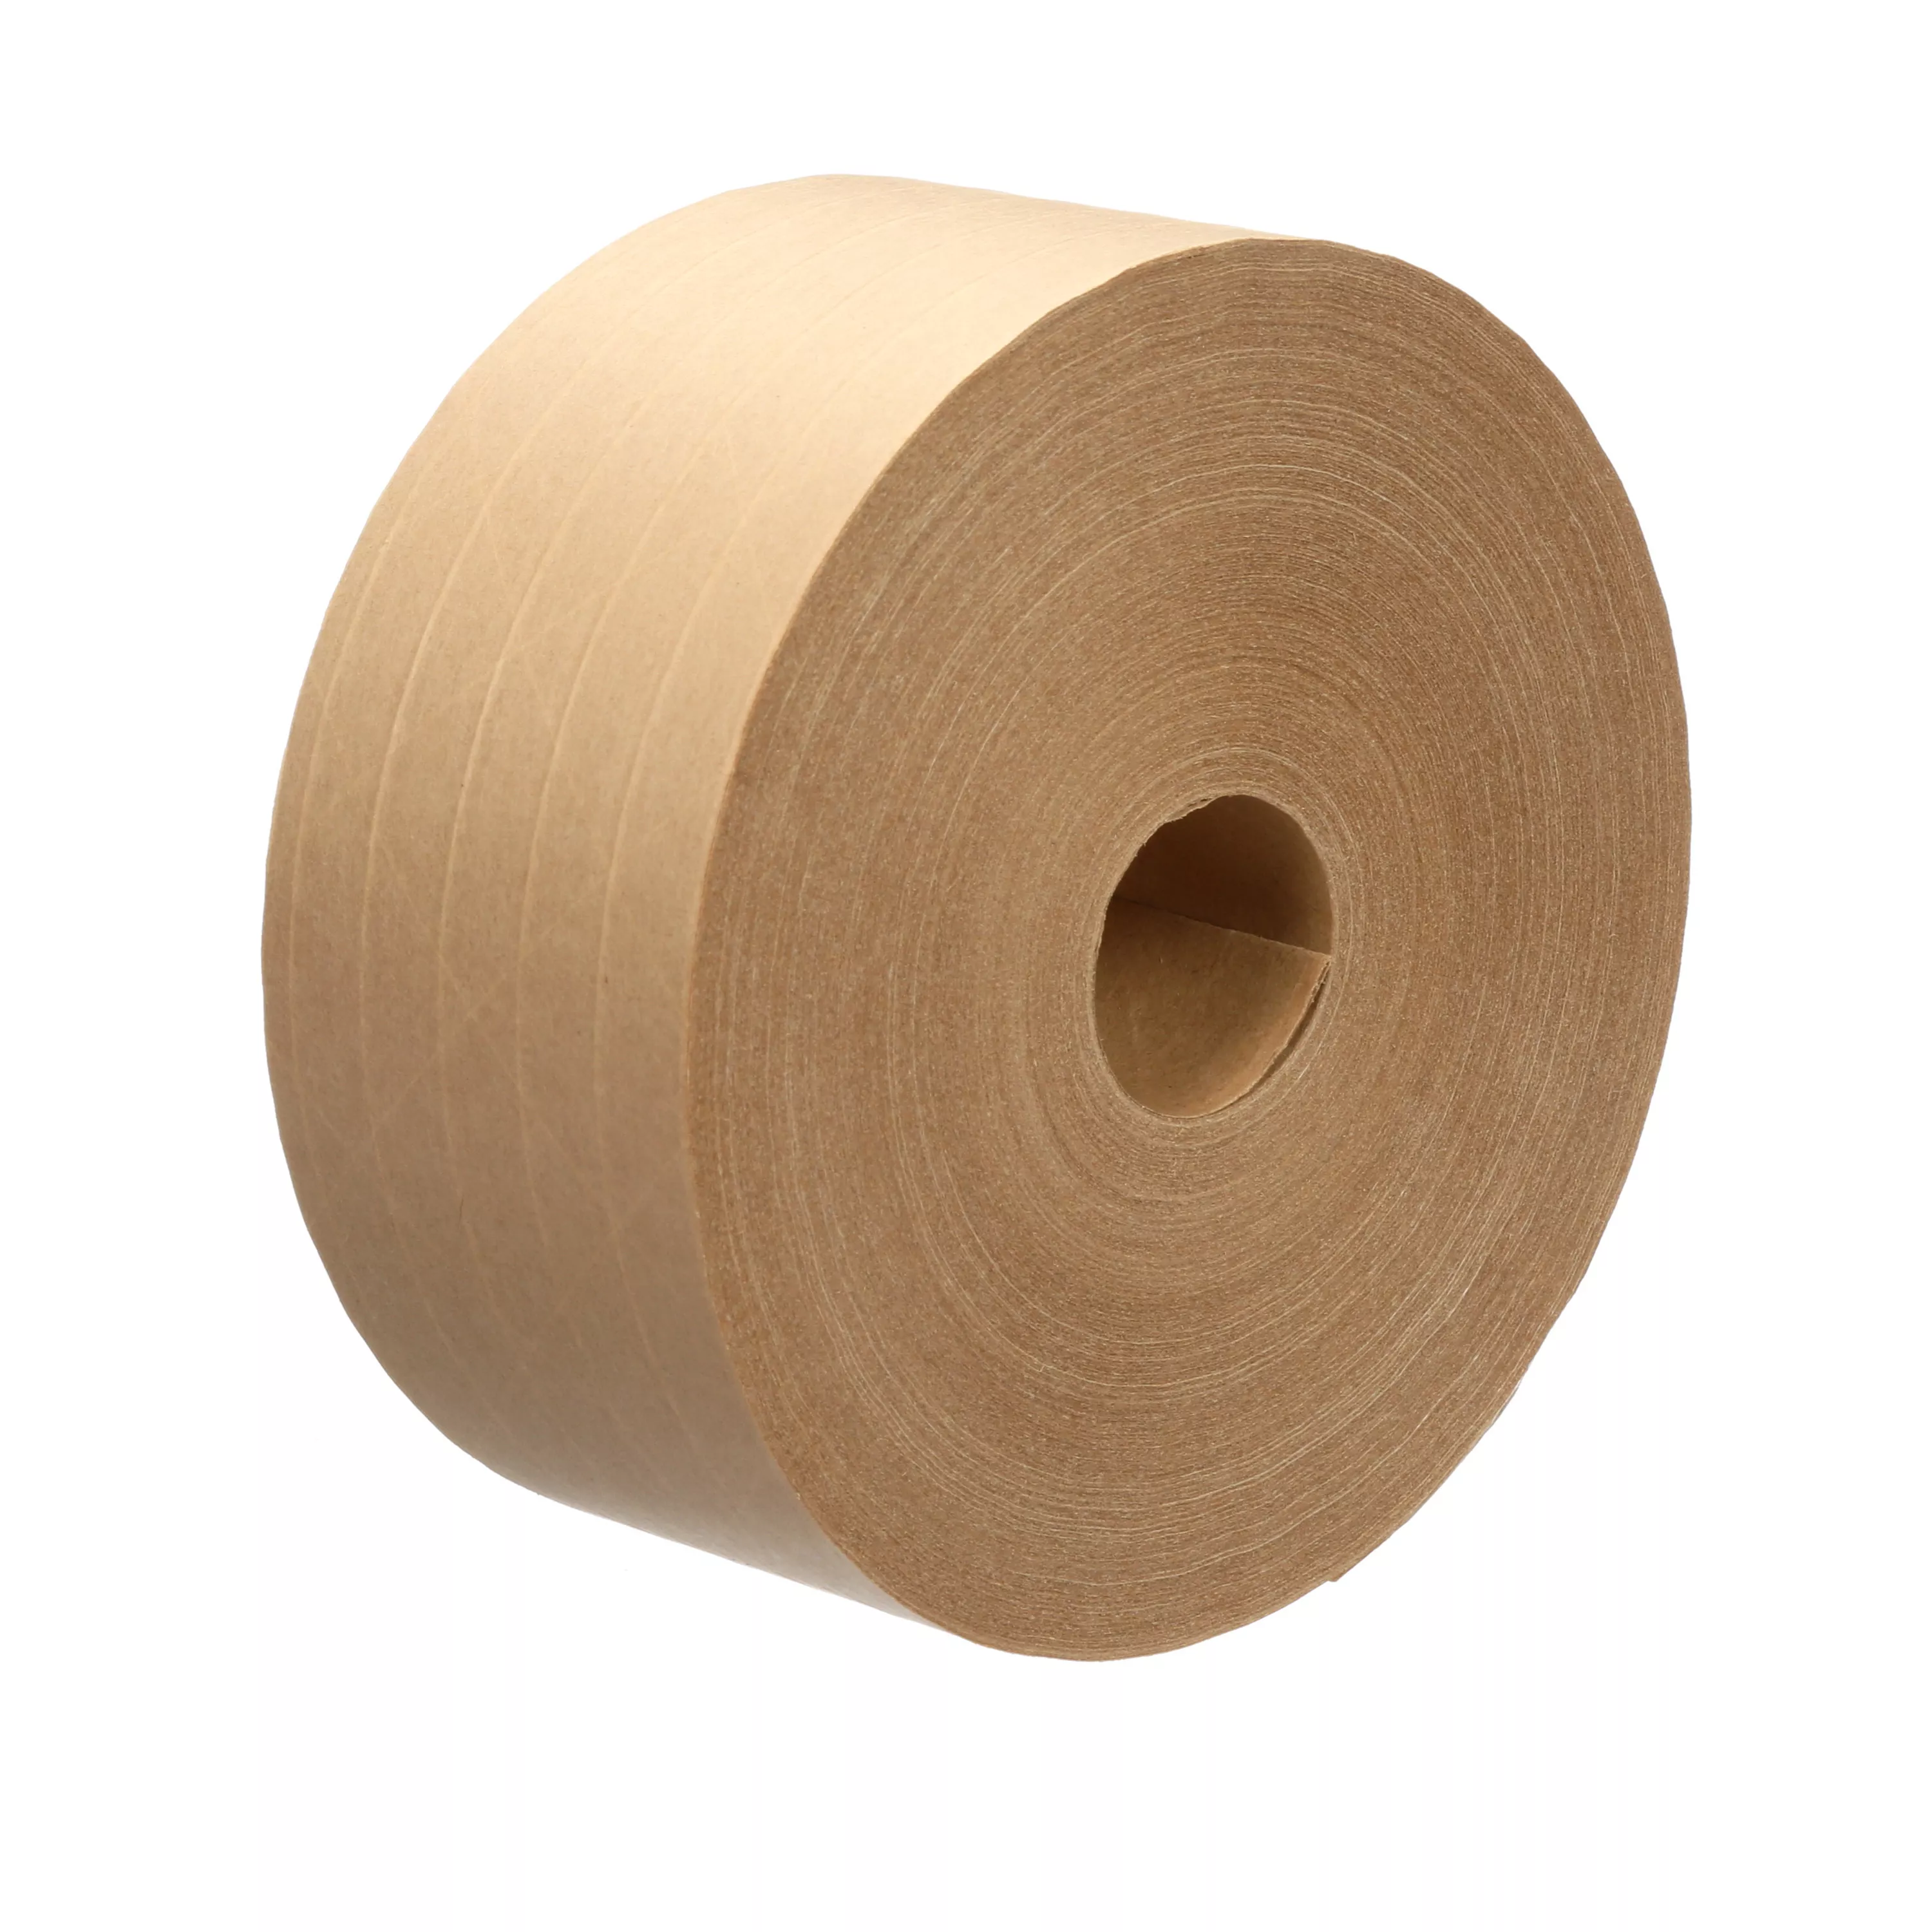 3M™ Water Activated Paper Tape 6145, Natural, Light Duty Reinforced, 3
inch x 600 ft, 10/Case